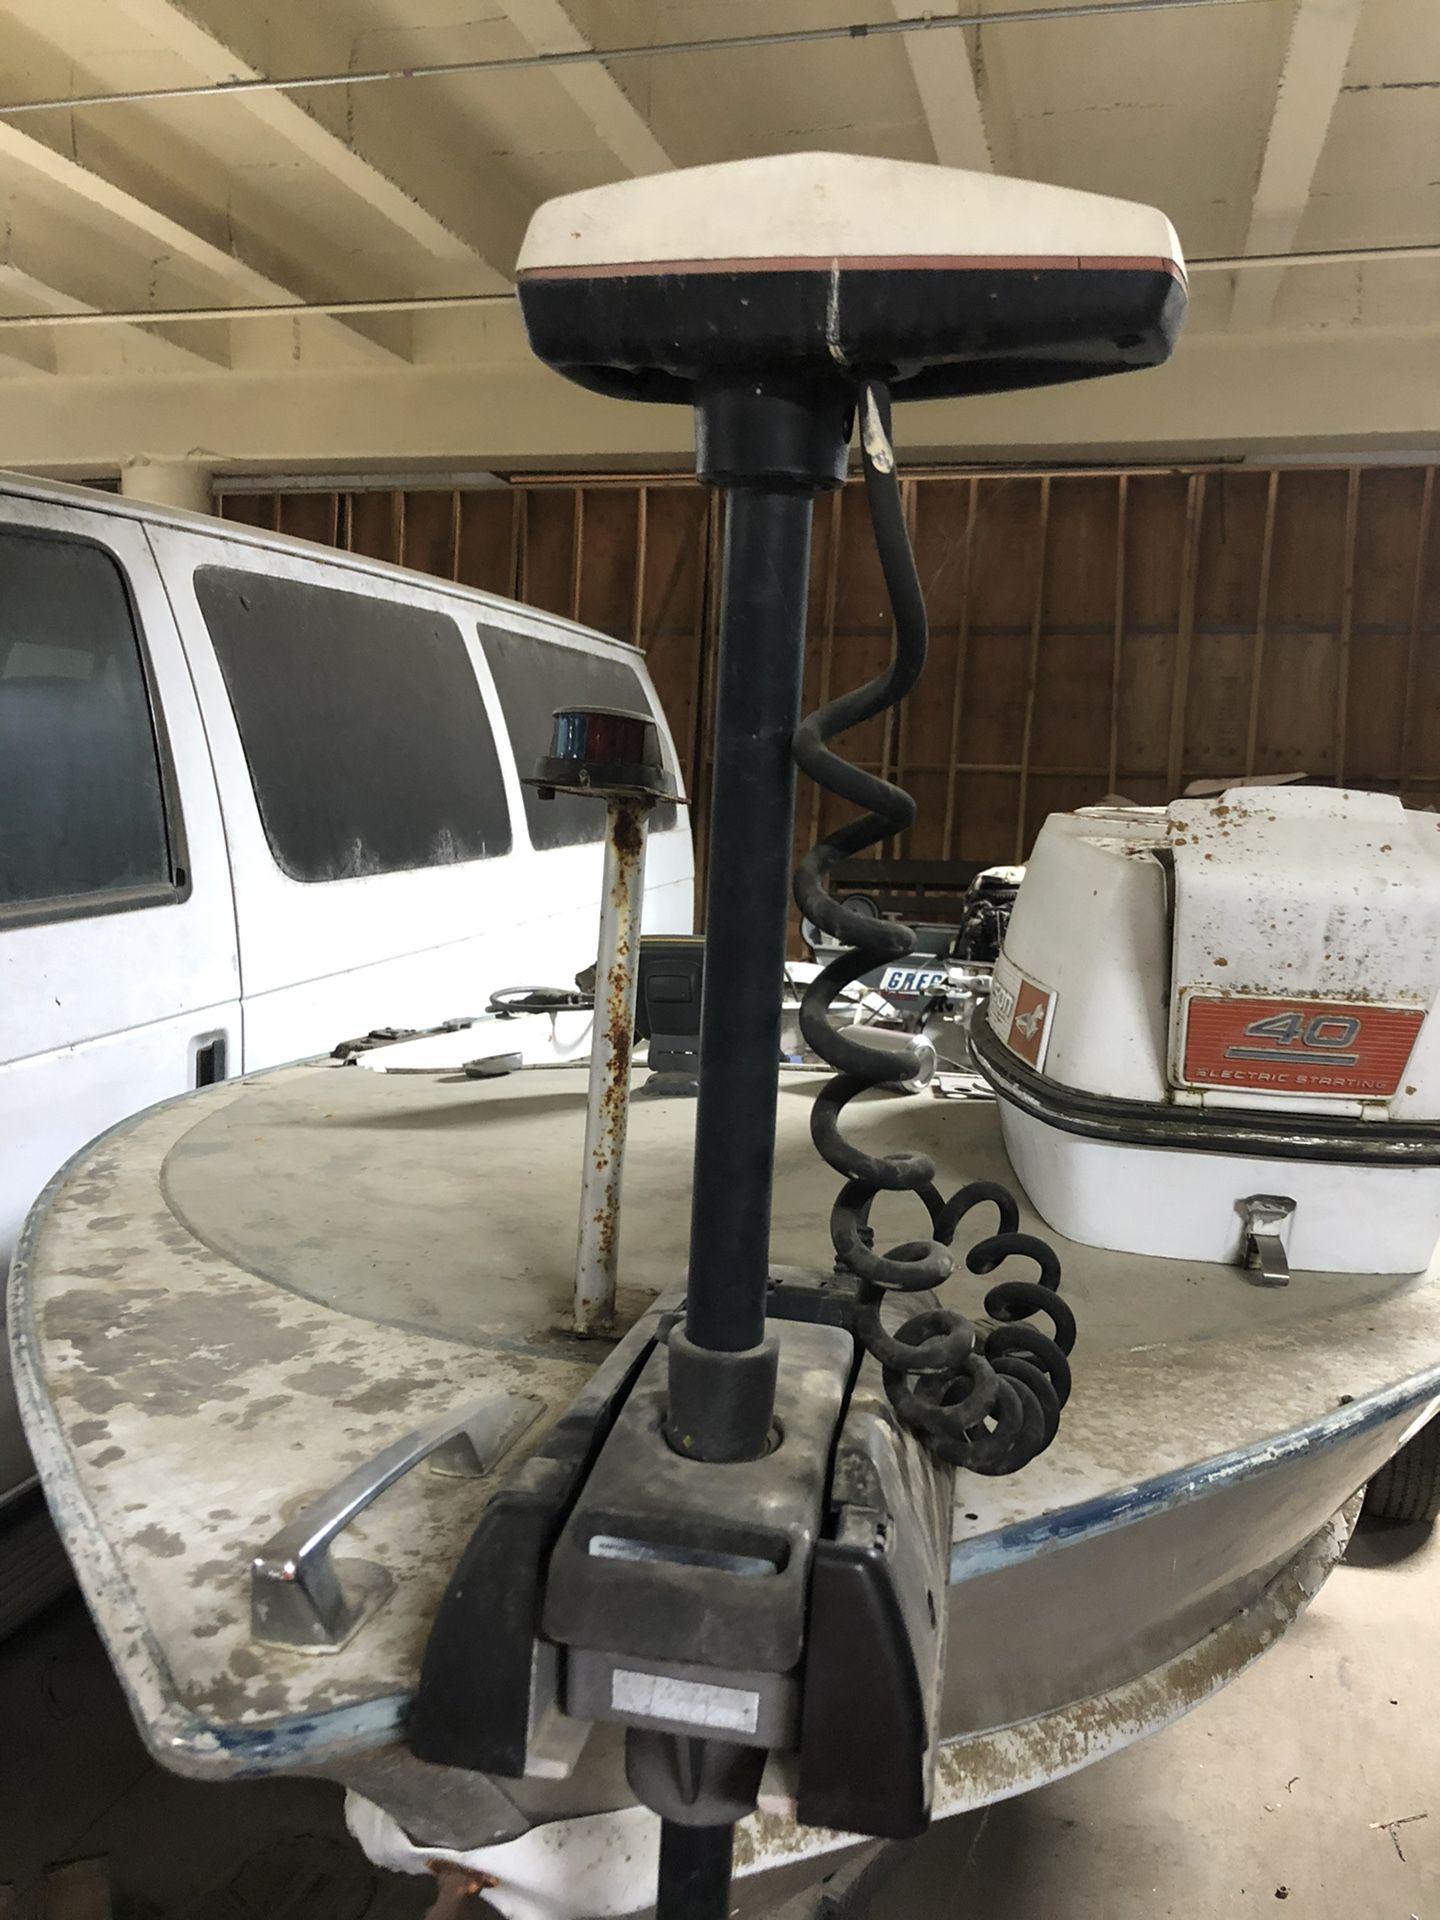 Crestliner 14 Foot Aluminum Boat With Johnson Outboard And Home Made Trailer